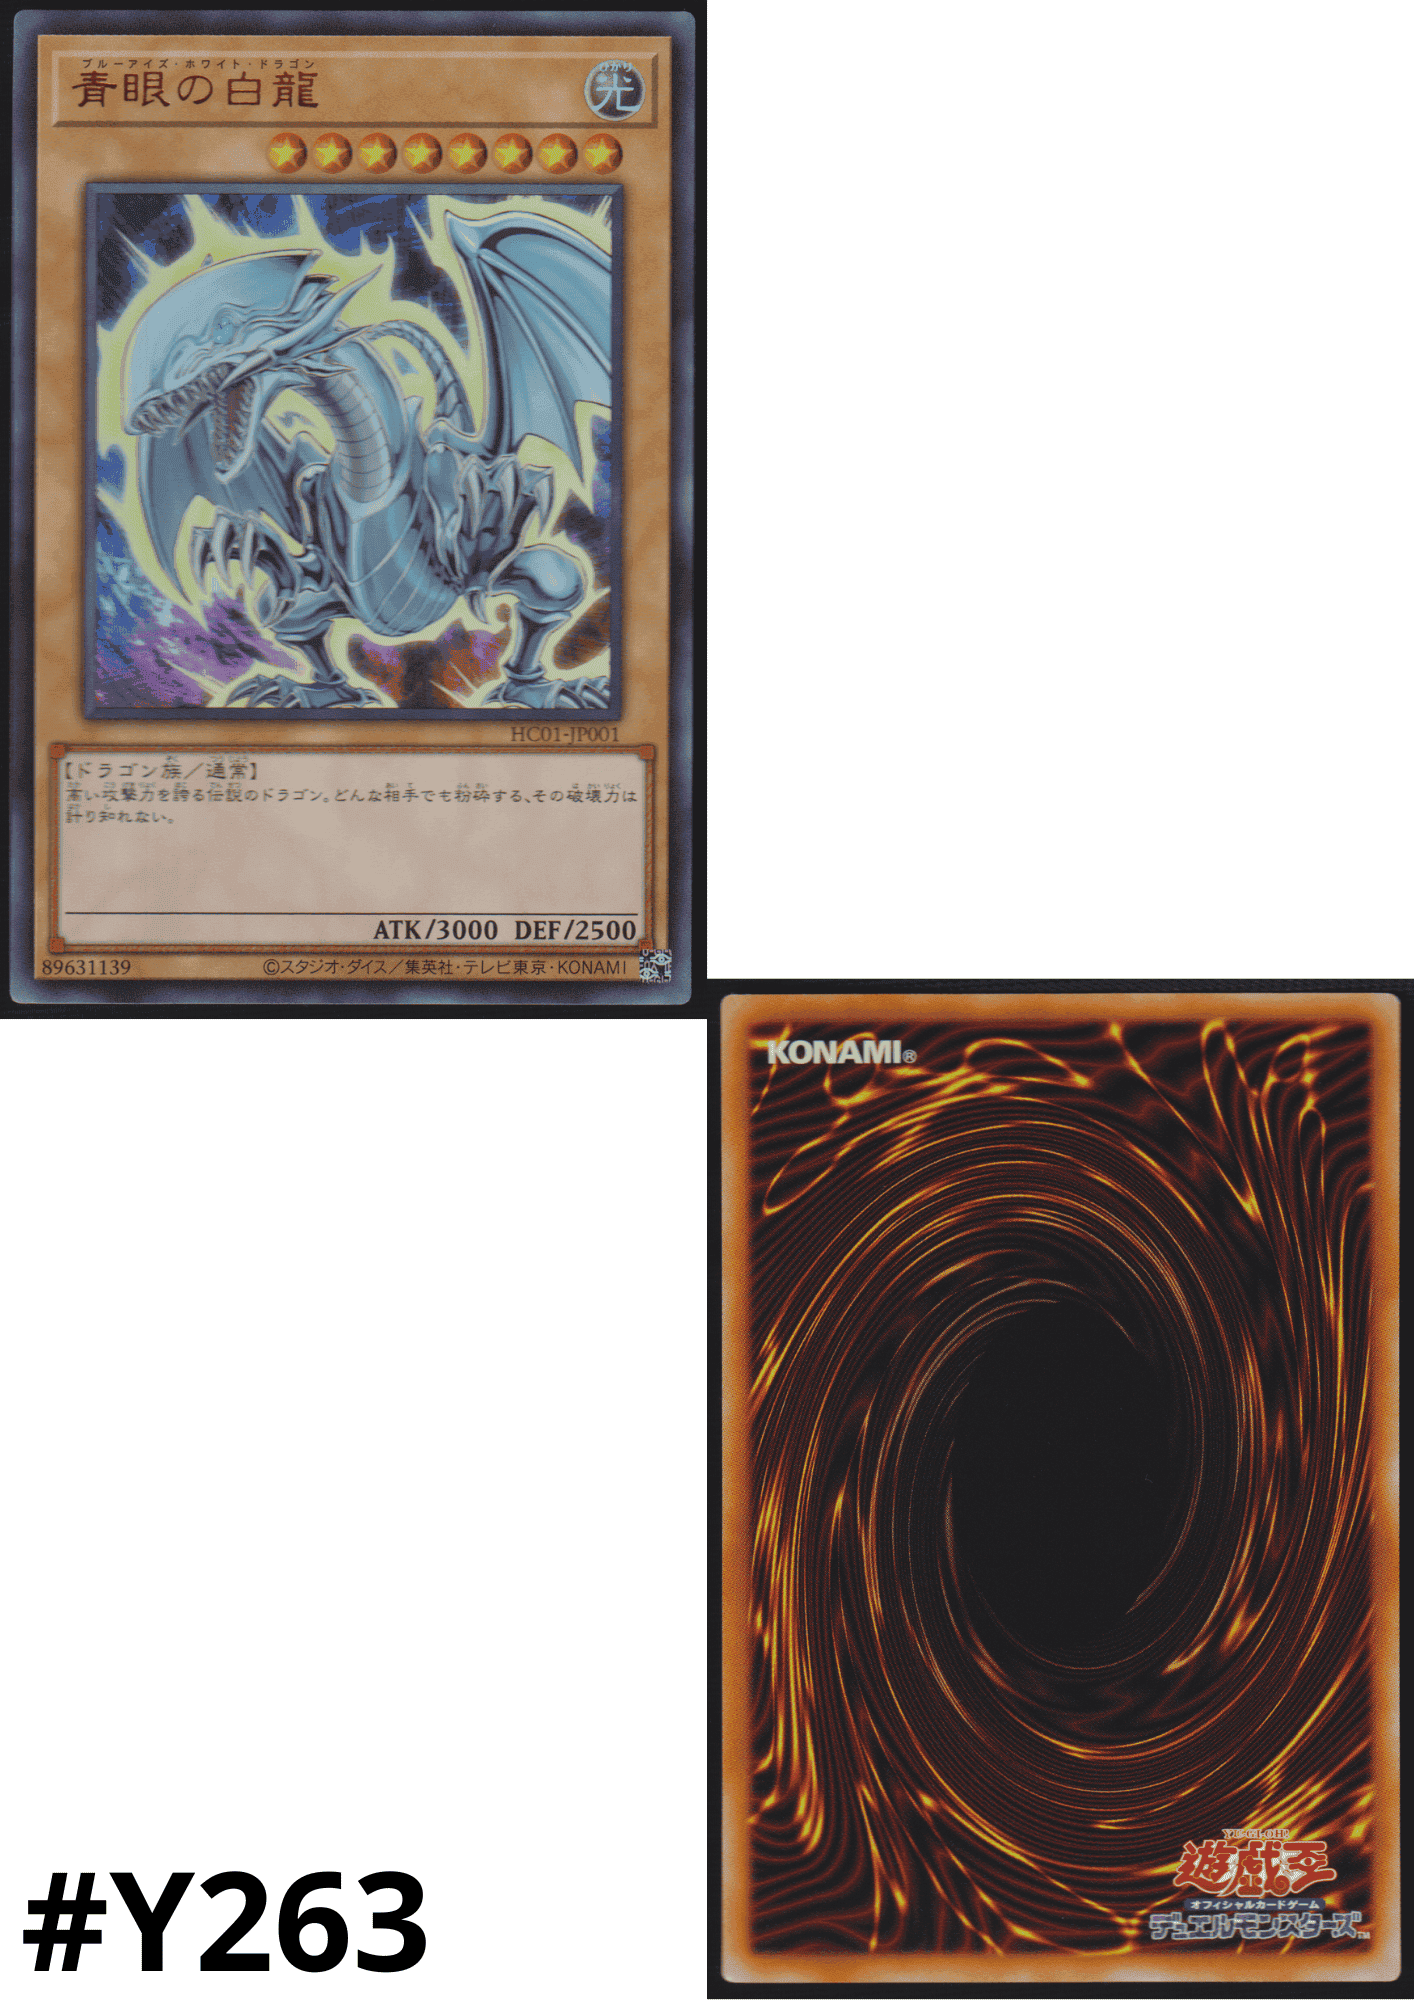 Blue-Eyes White Dragon HC01-JP001 | HISTORY ARCHIVECOLLECTION ChitoroShop